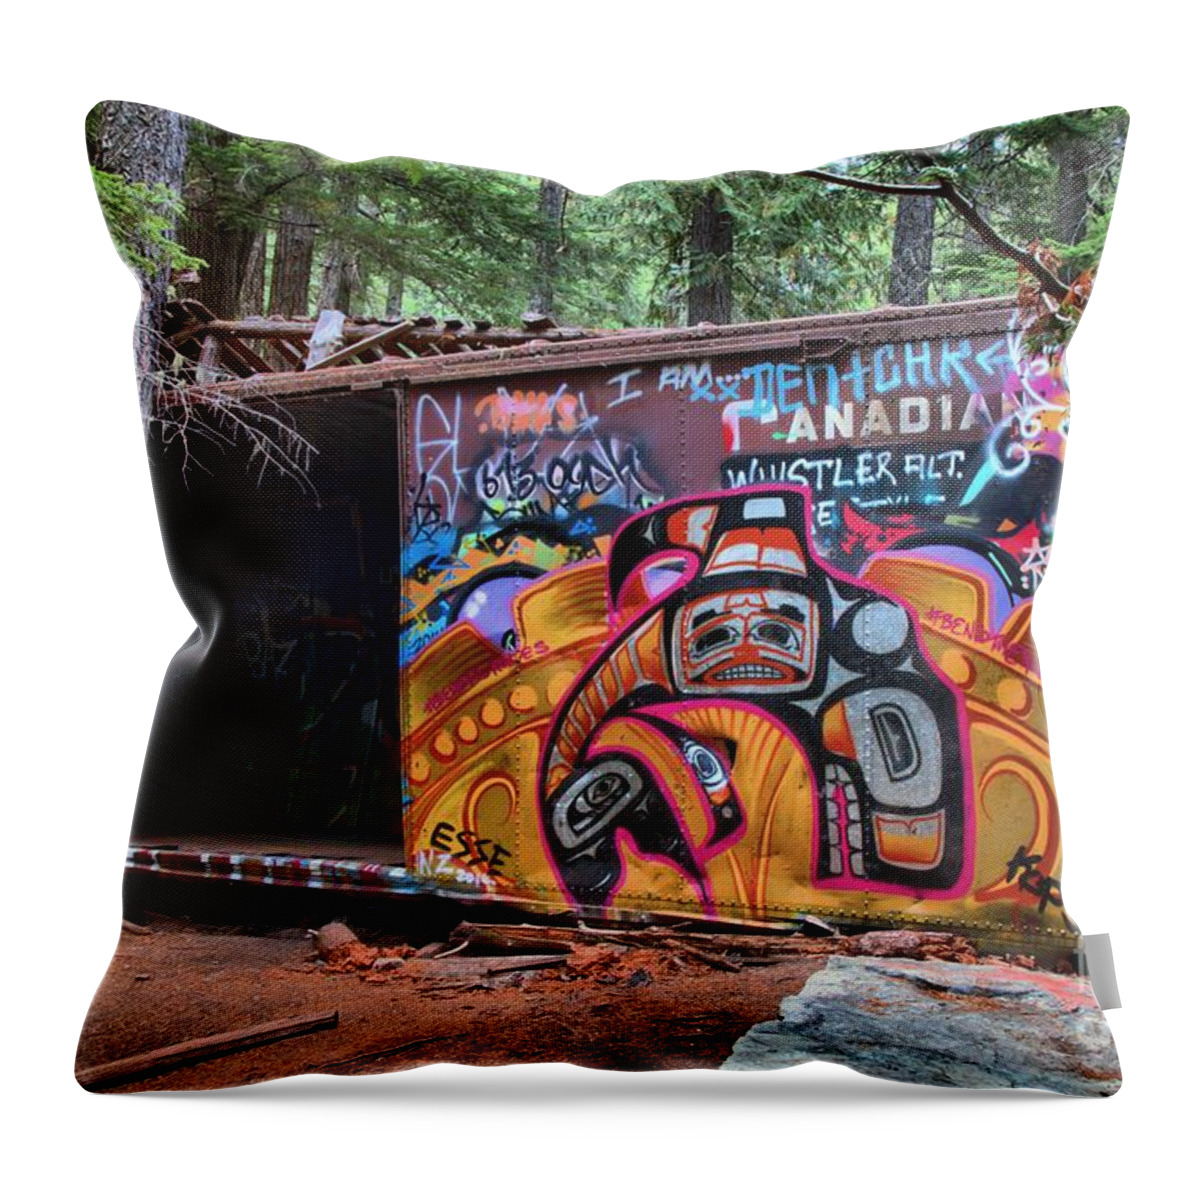 Canadian Train Wreck Throw Pillow featuring the photograph Artistic Whistler Train Wreckage by Adam Jewell